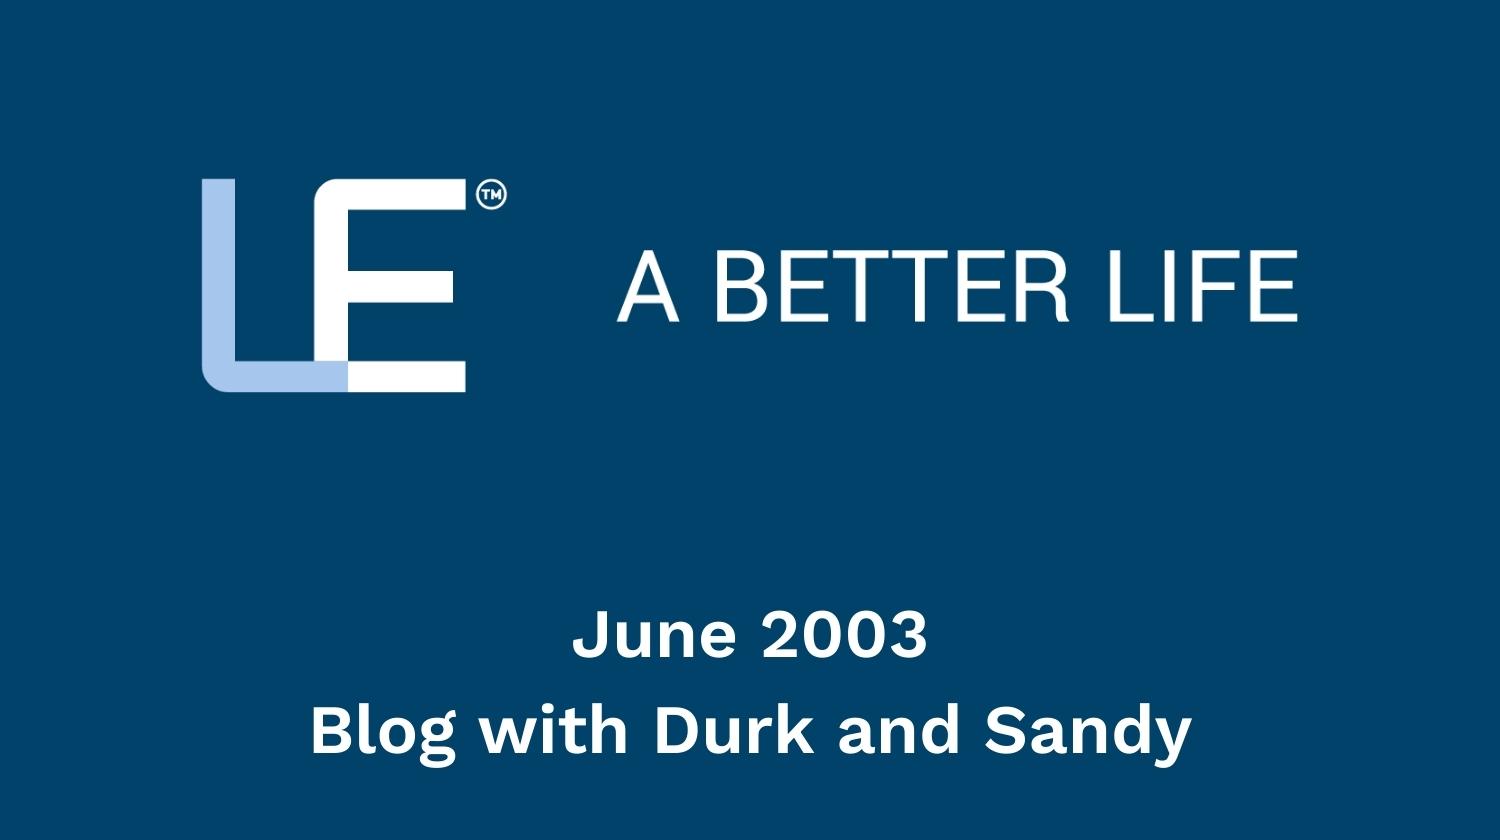 June 2003 Blog with Durk and Sandy